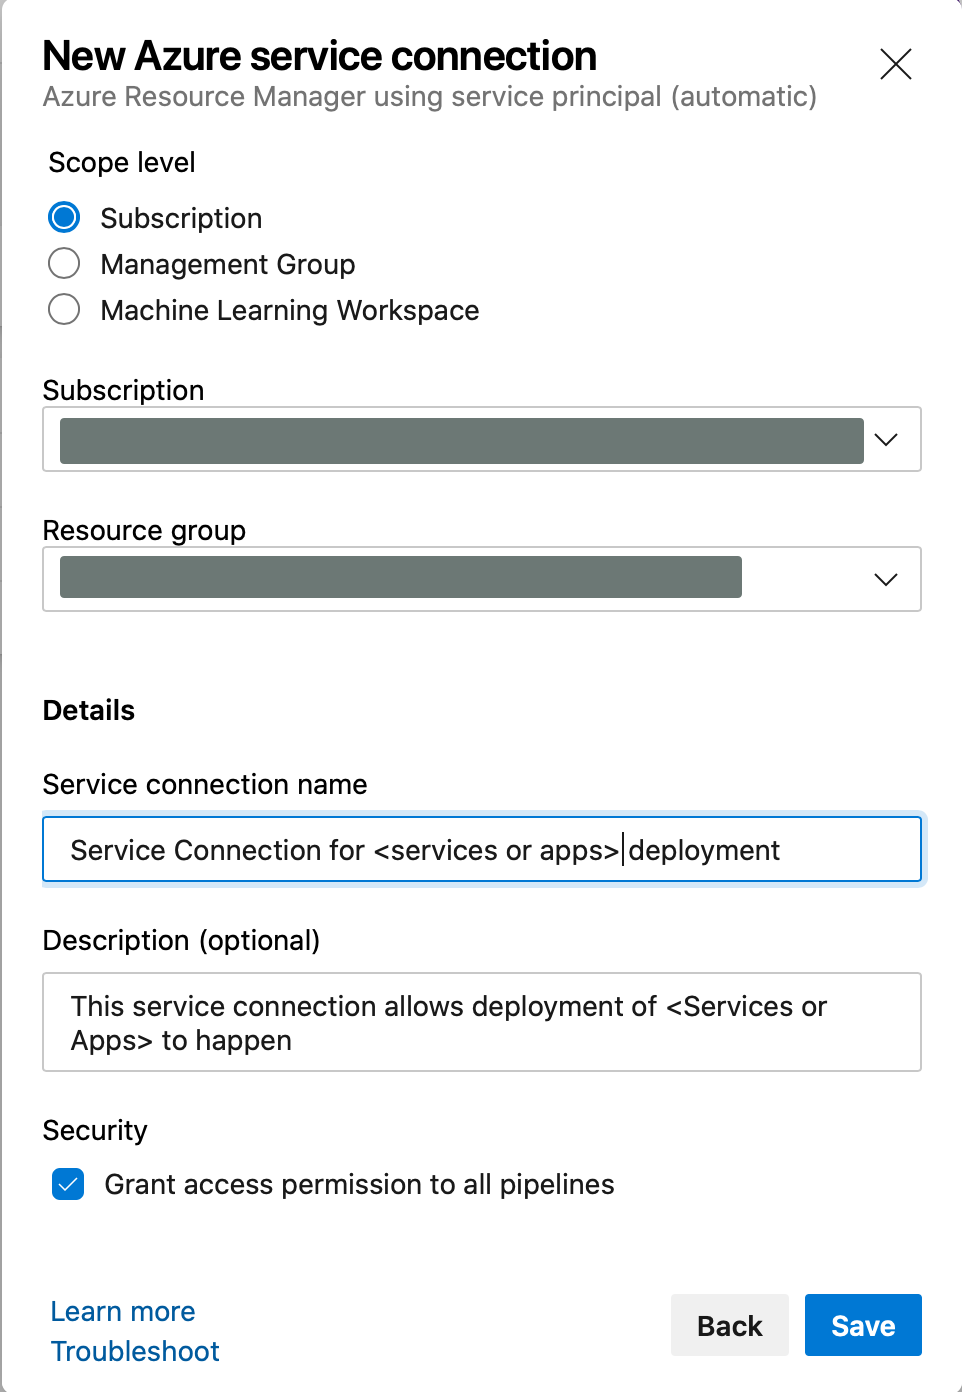 Figure F - Selecting scope and naming the service connection